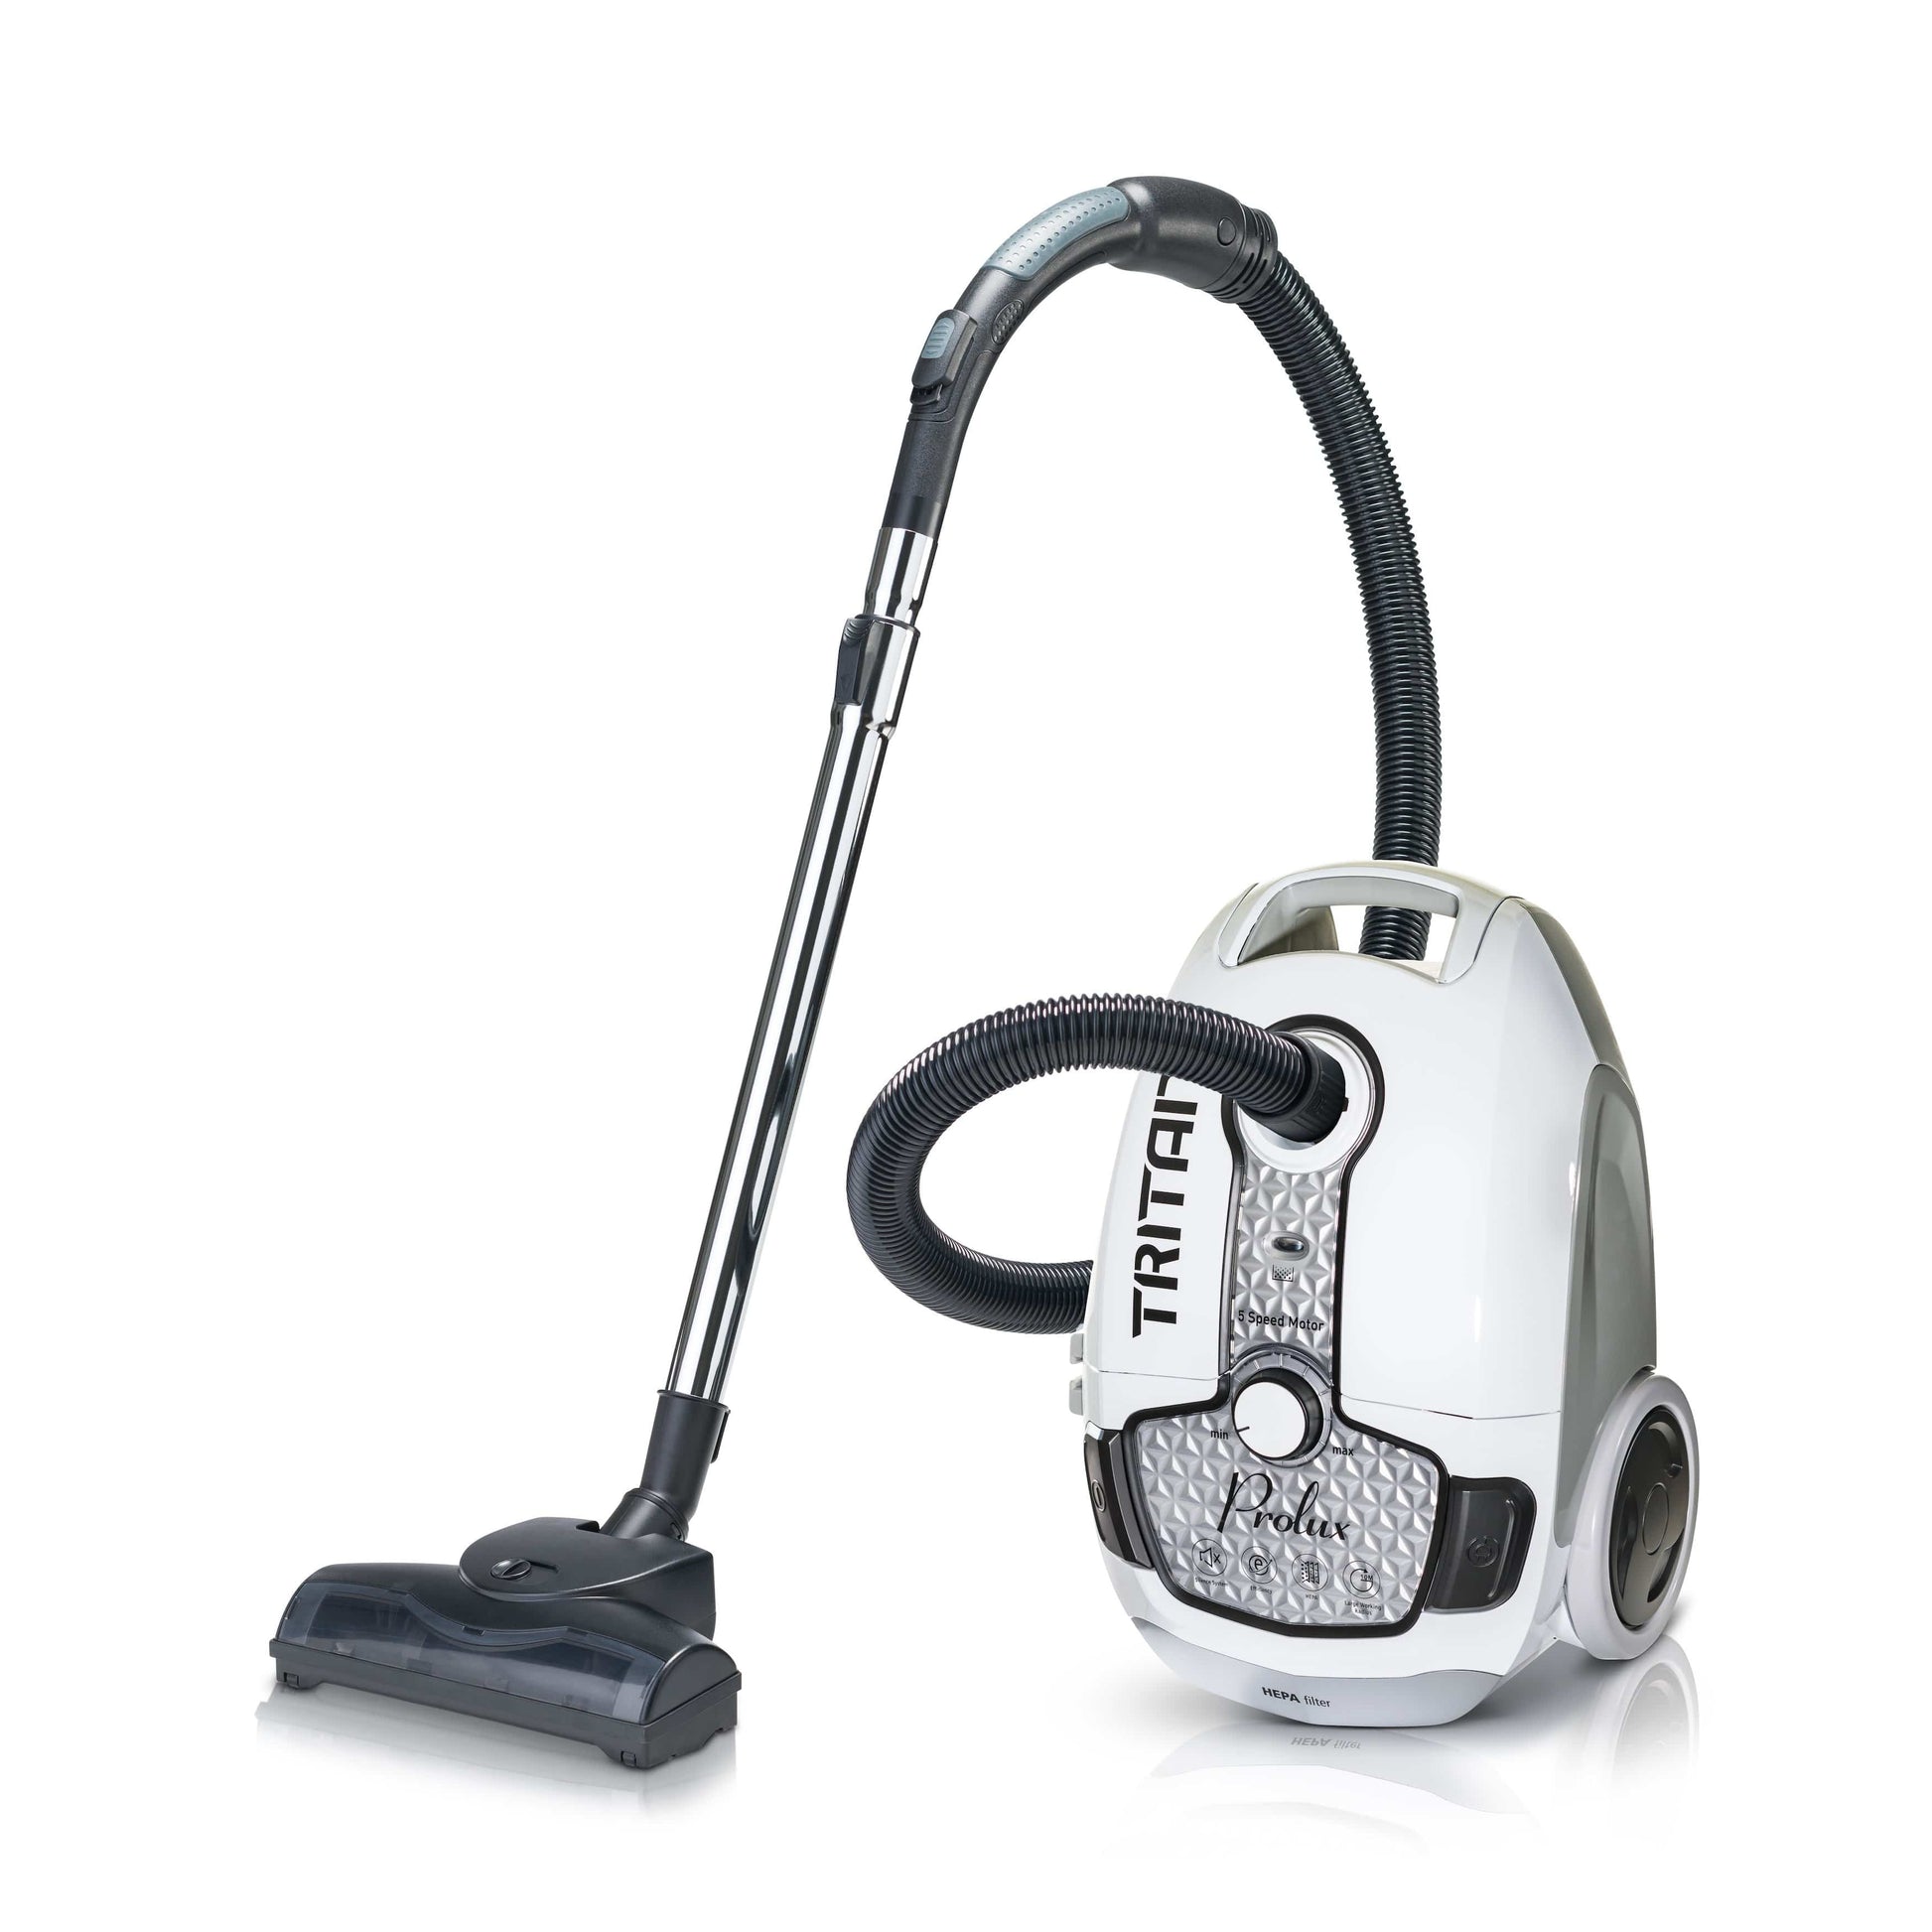 Discover Upright Vacuum + Compact Canister – Oreck